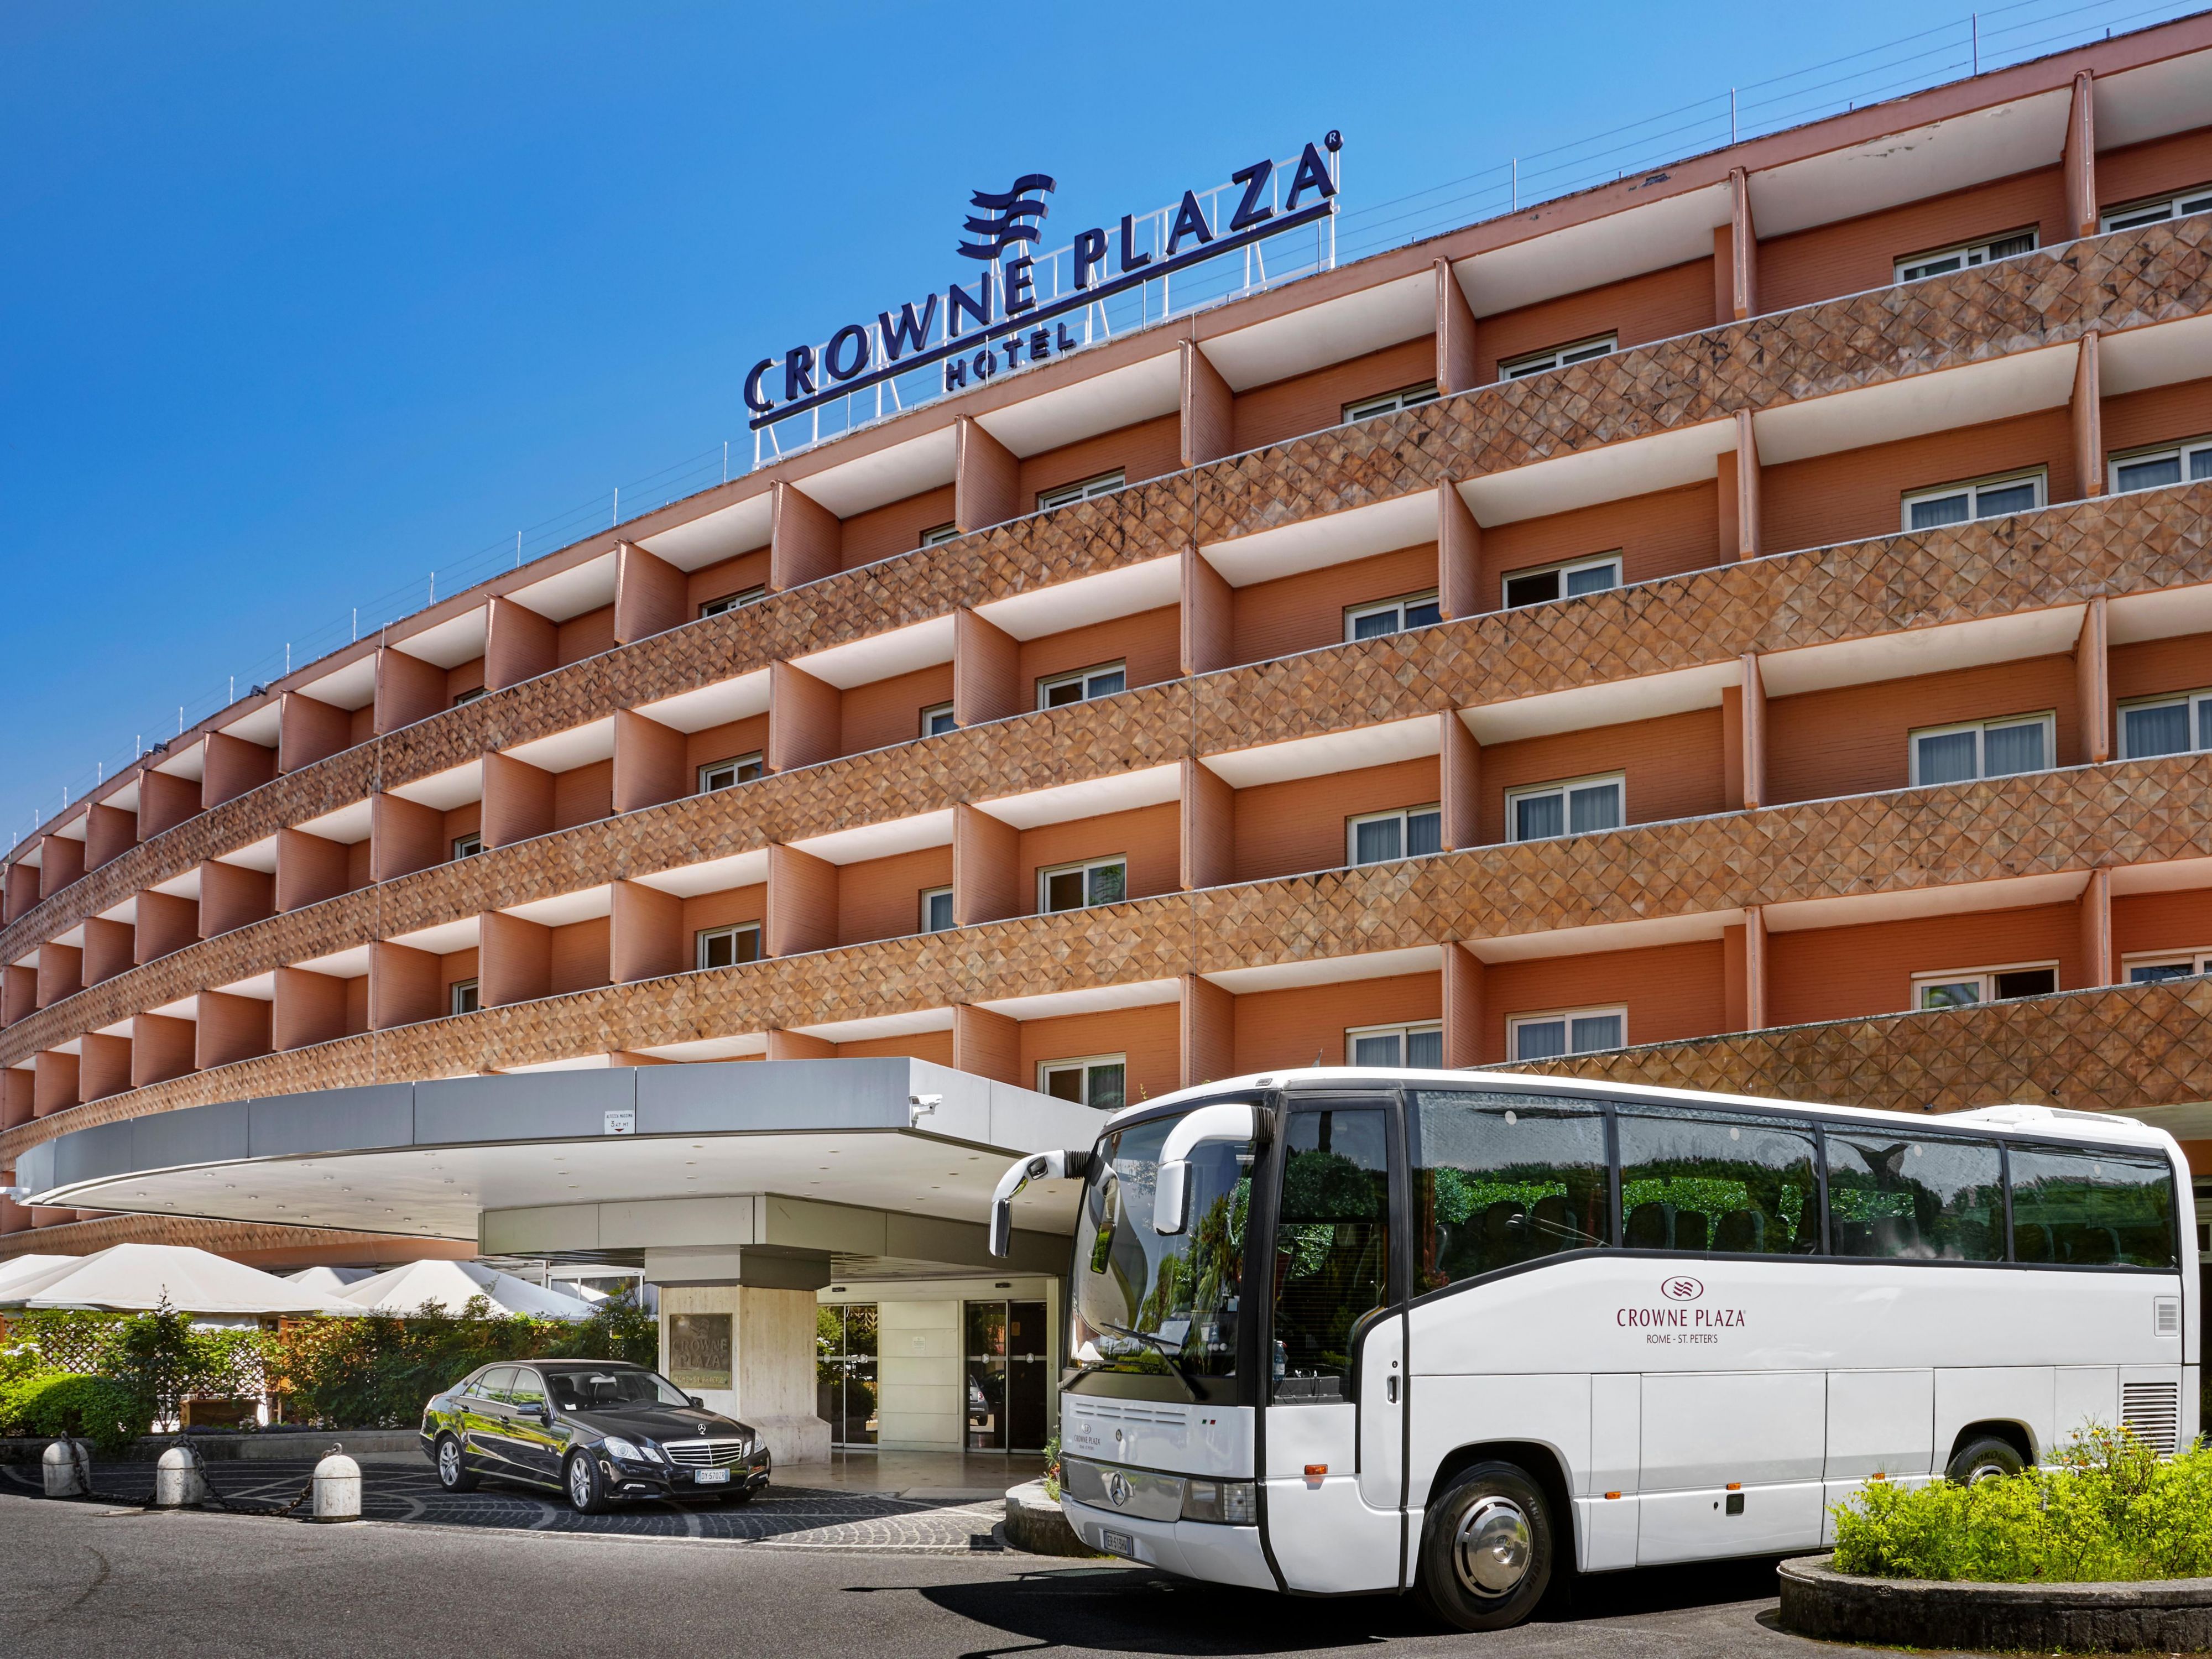 It is possible to book the shuttles to/from Fiumicino Airport via WhatsApp at +39 3899692215 or via email bus.plaza415@gmail.com.
Price 1-2 pax Euro 40 one way; 3-4 pax Euro 50 one way.